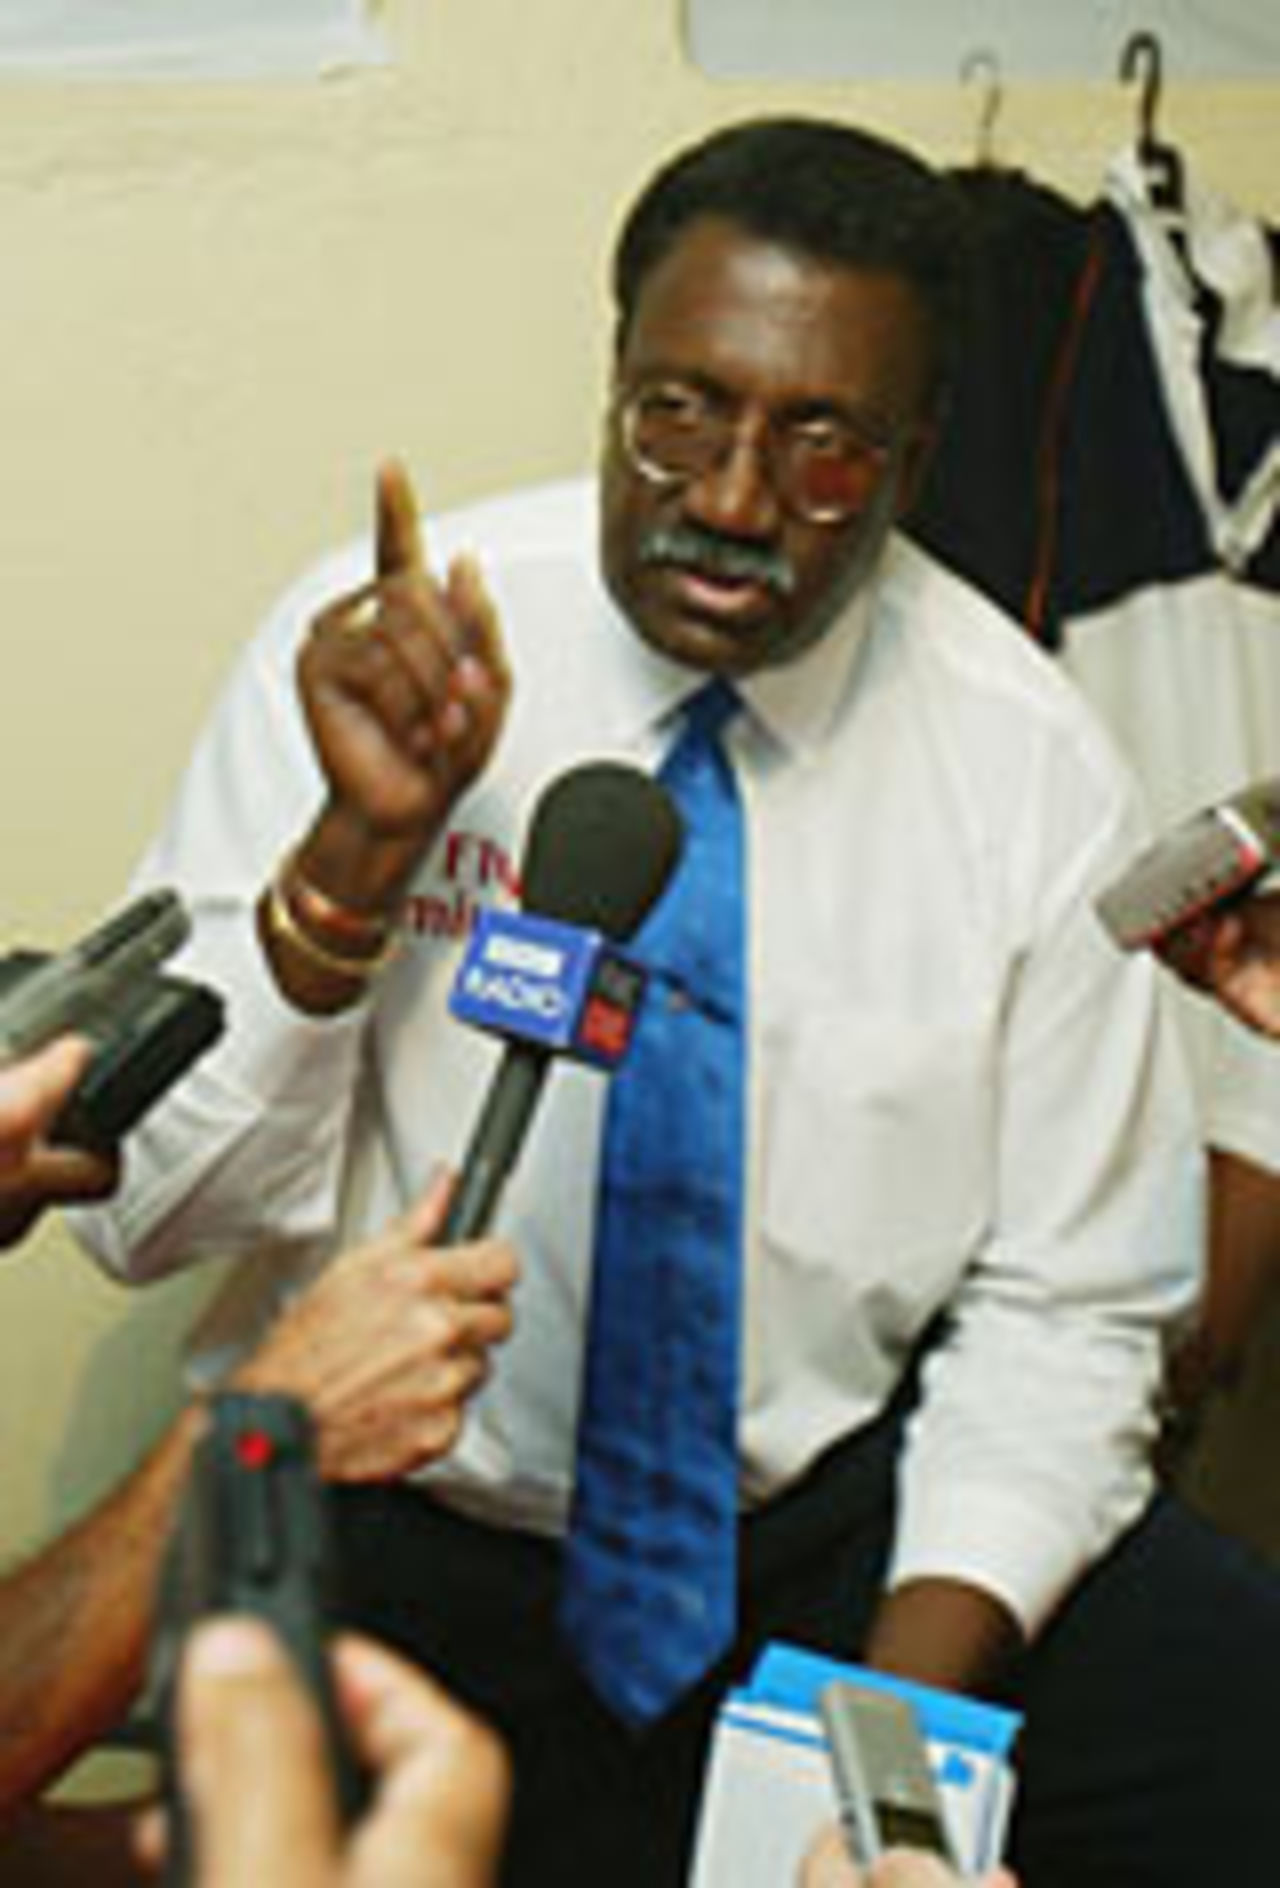 Clive Lloyd delivers his findings after looking into accusations that Nasser Hussain abused Muttiah Muralitharan, Sri Lanka v England, 2nd Test, Kandy, December 11, 2003